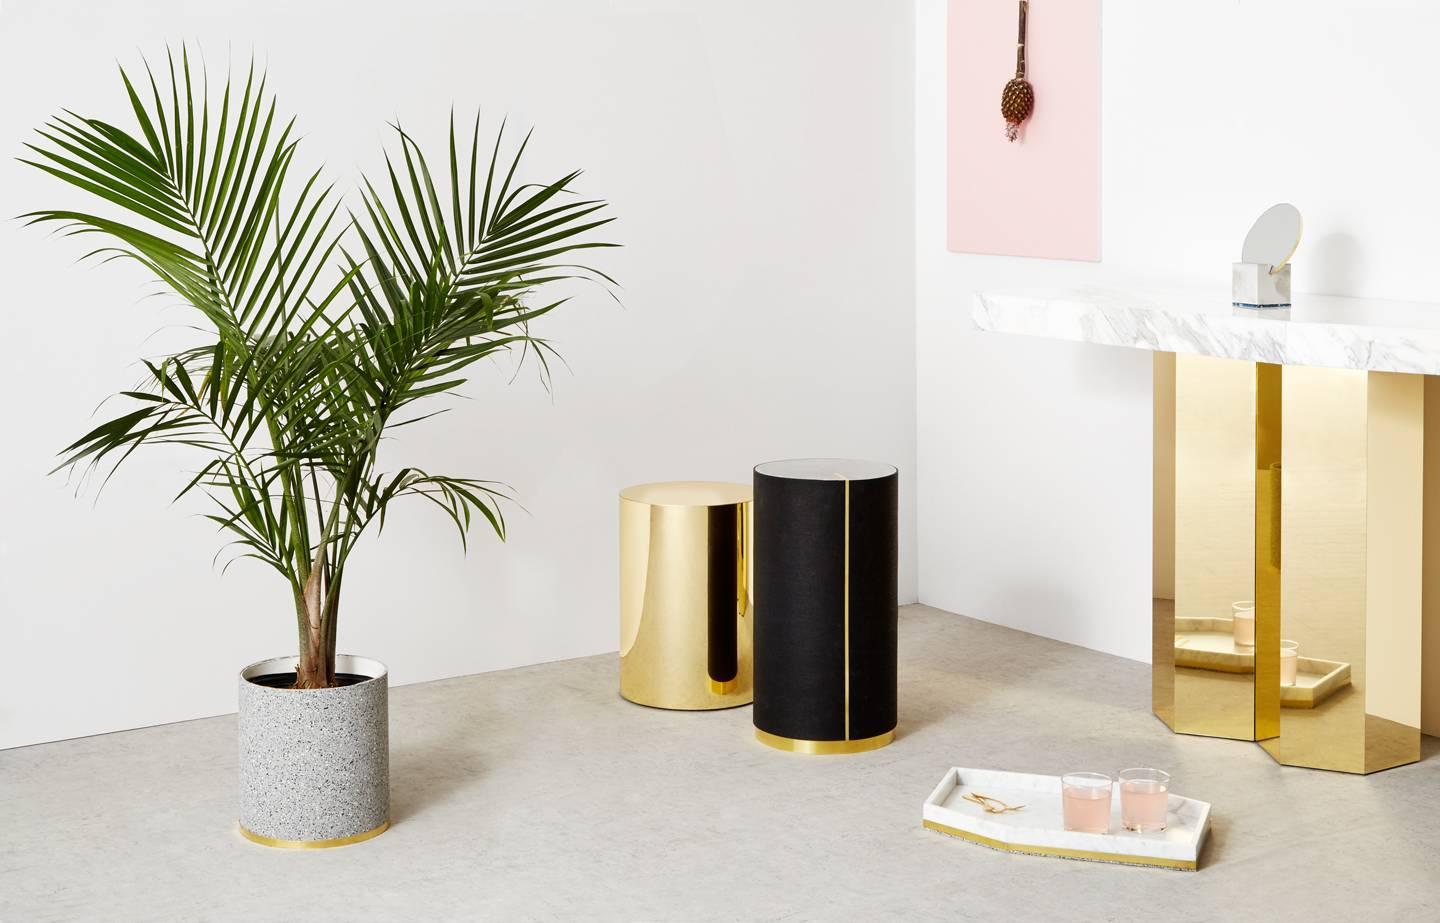 Polished brass finish cylinder side table. Rubber feet for stability and floor protection.
Pairs beautifully with a rubber CYL.
Shown with rubber CYL II in pure black, and rubber planter.

Measures: 12